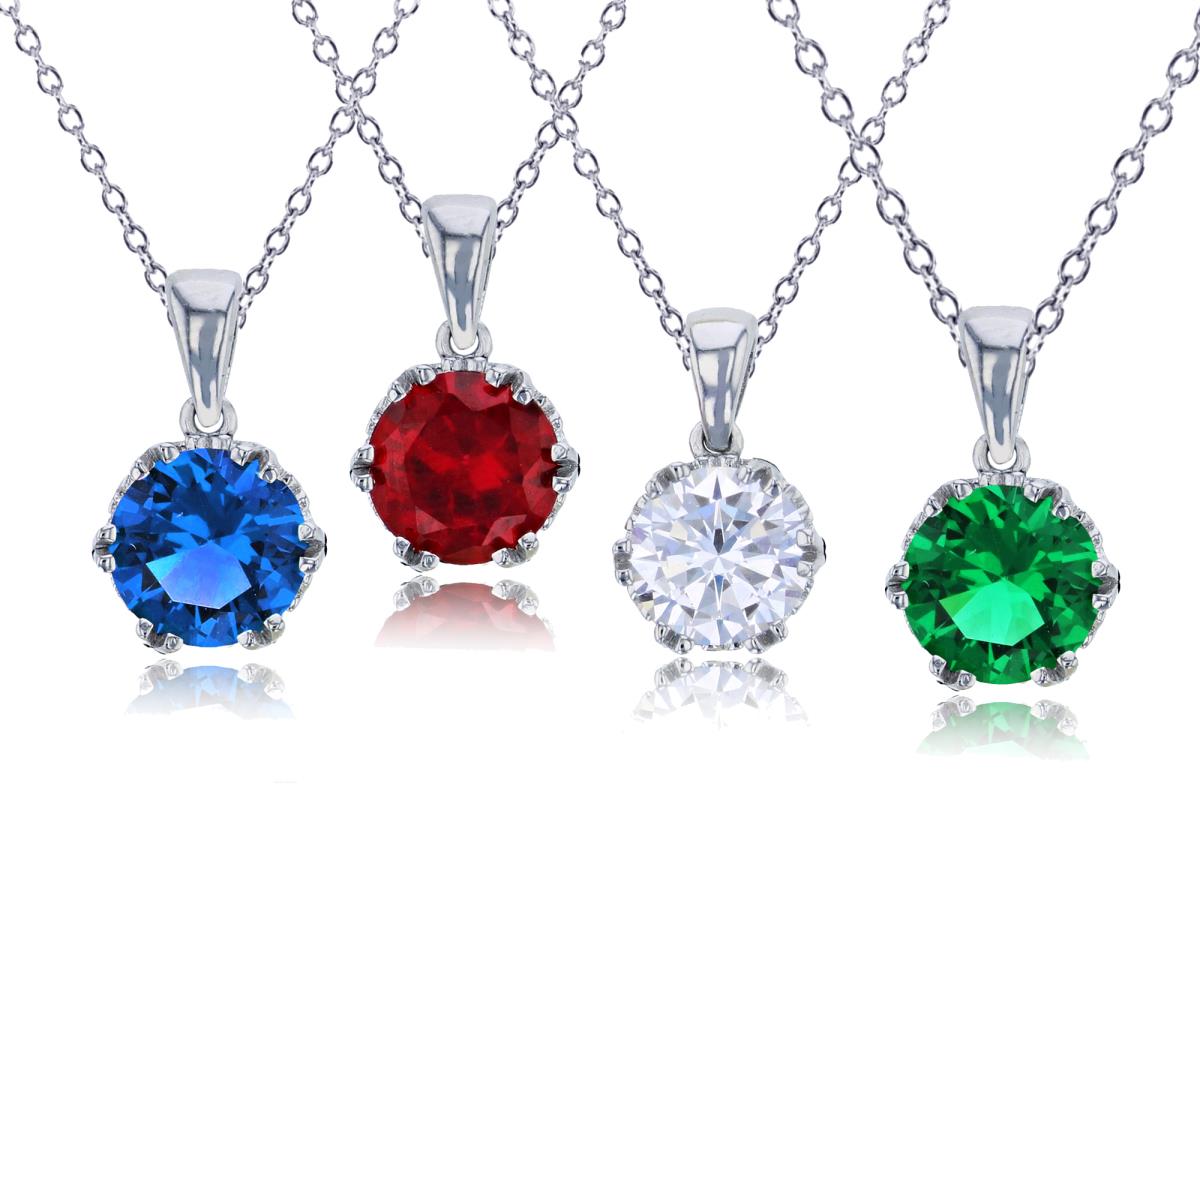 Sterling Silver Rhodium 8mm White, Ruby, Blue & Green Round Cut CZ Set Of 4 Pendants with 18" Rollo Chain